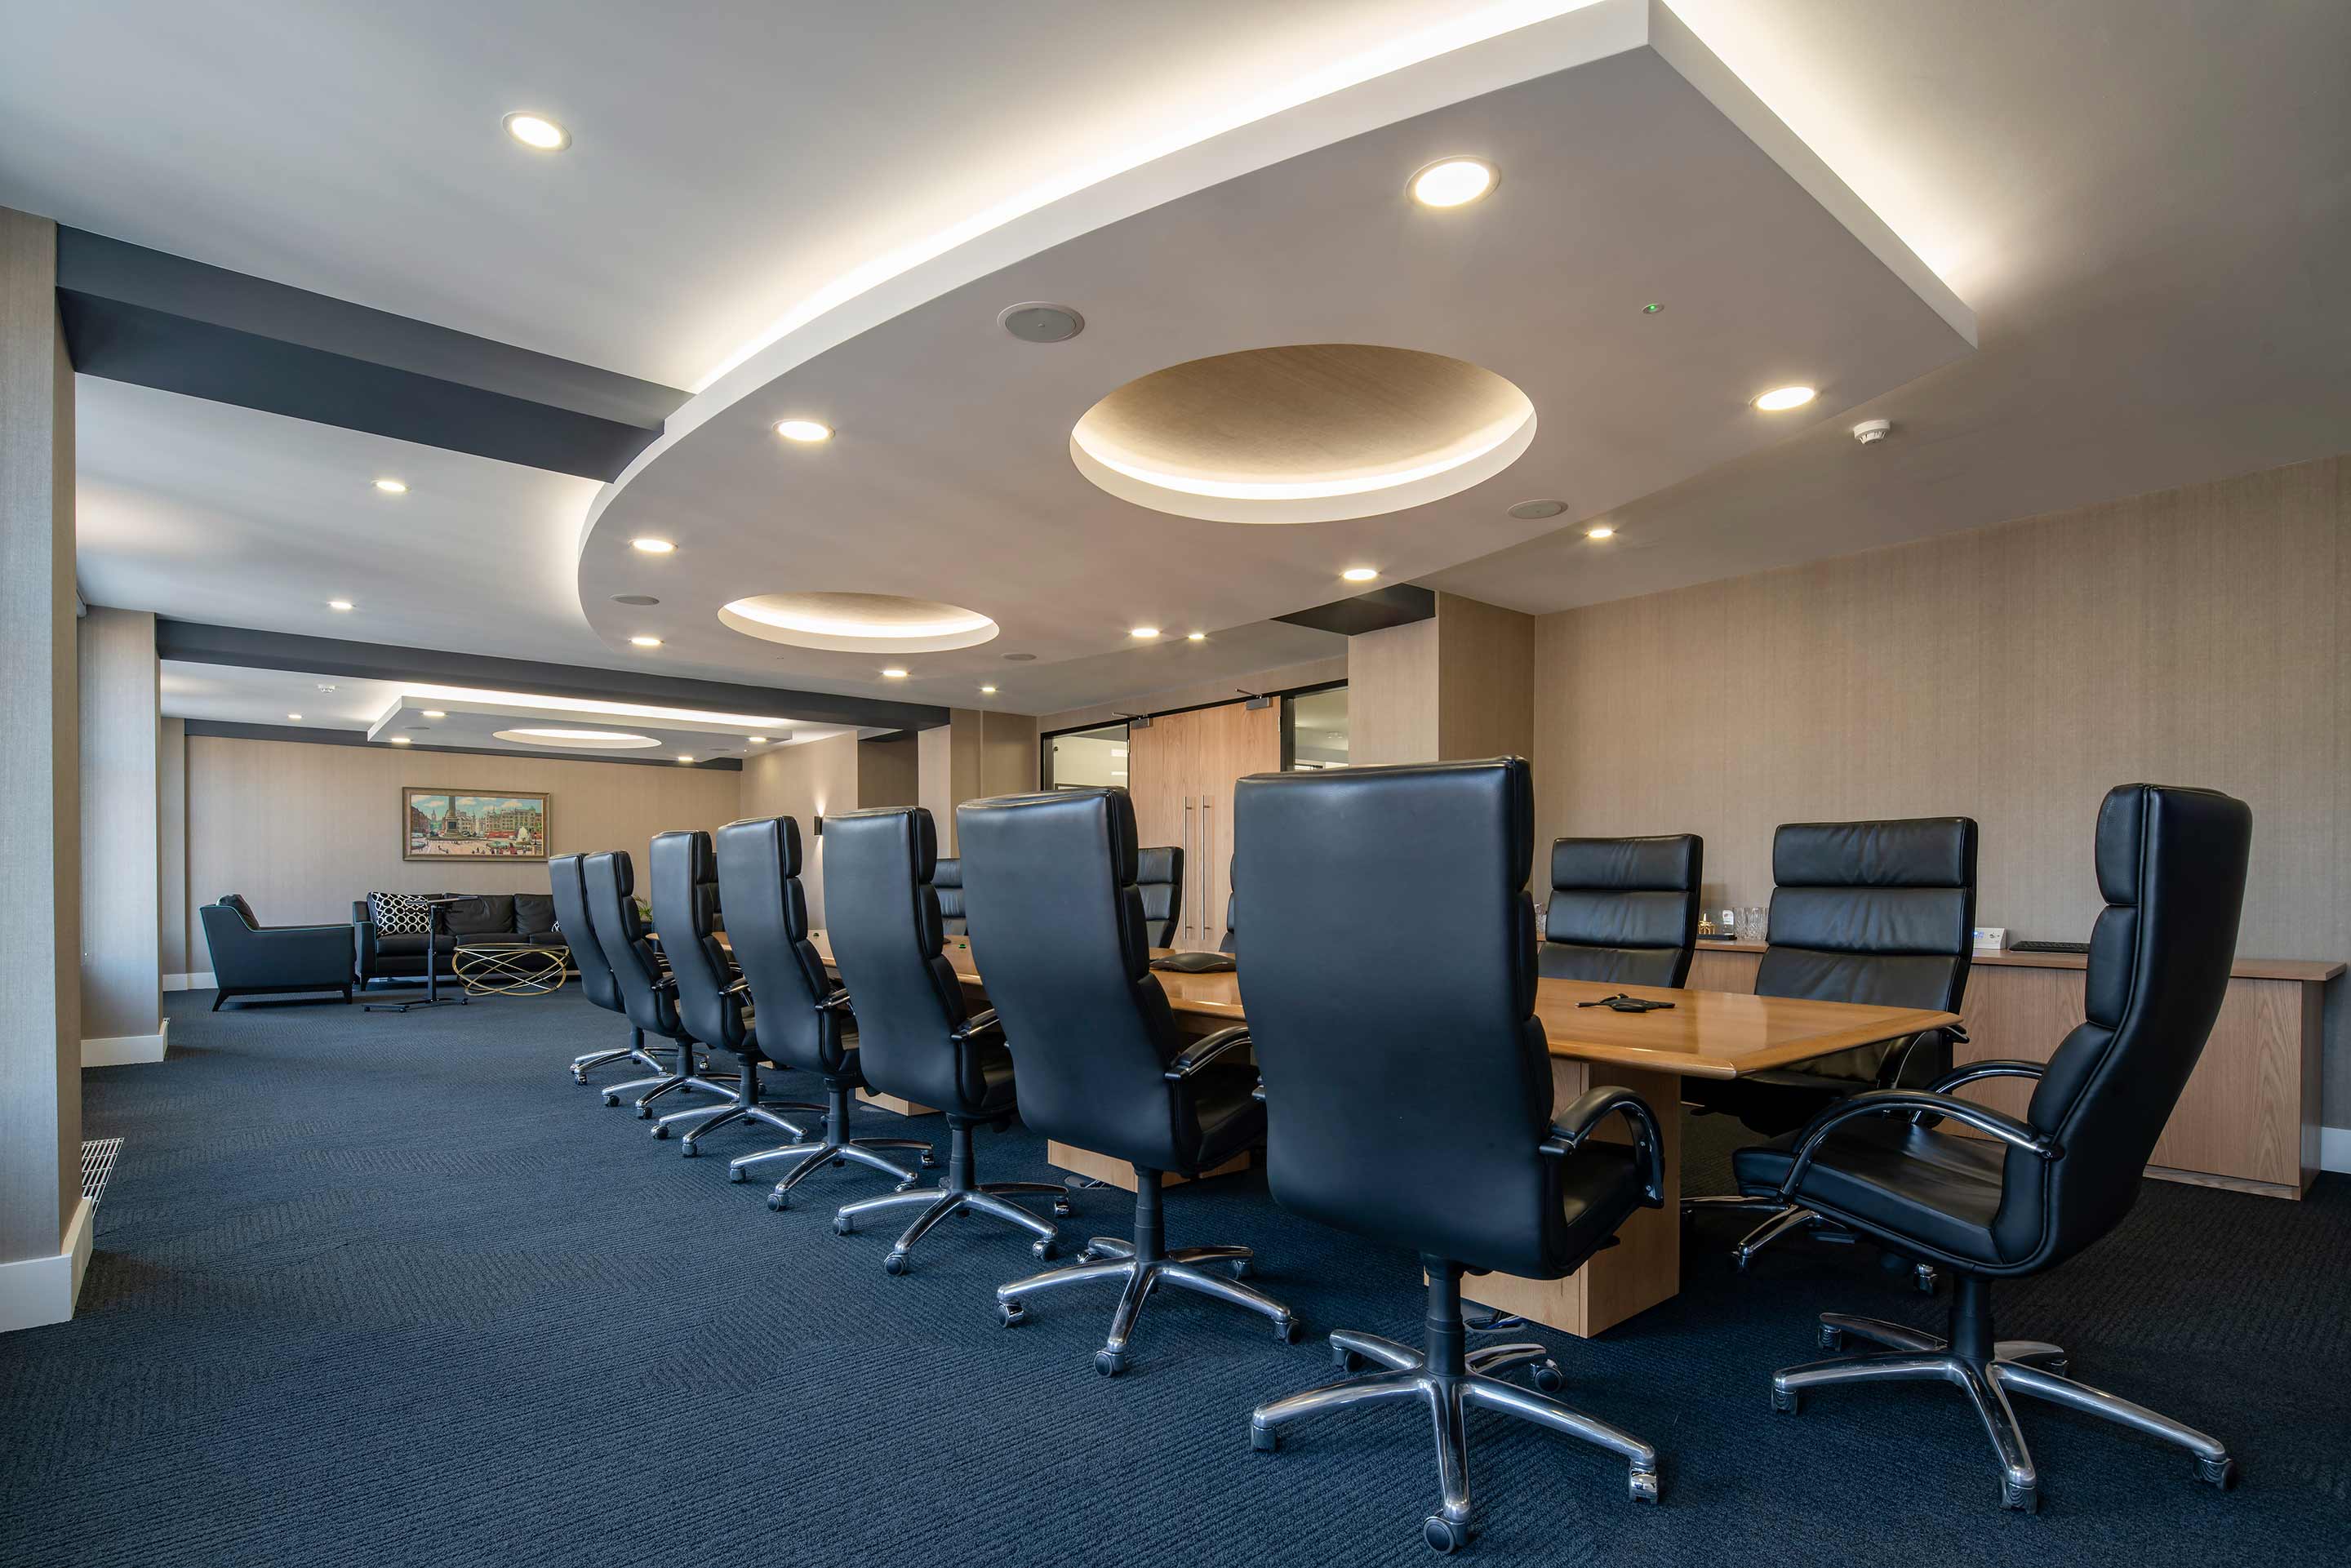 High backed leather chairs in a large boardroom